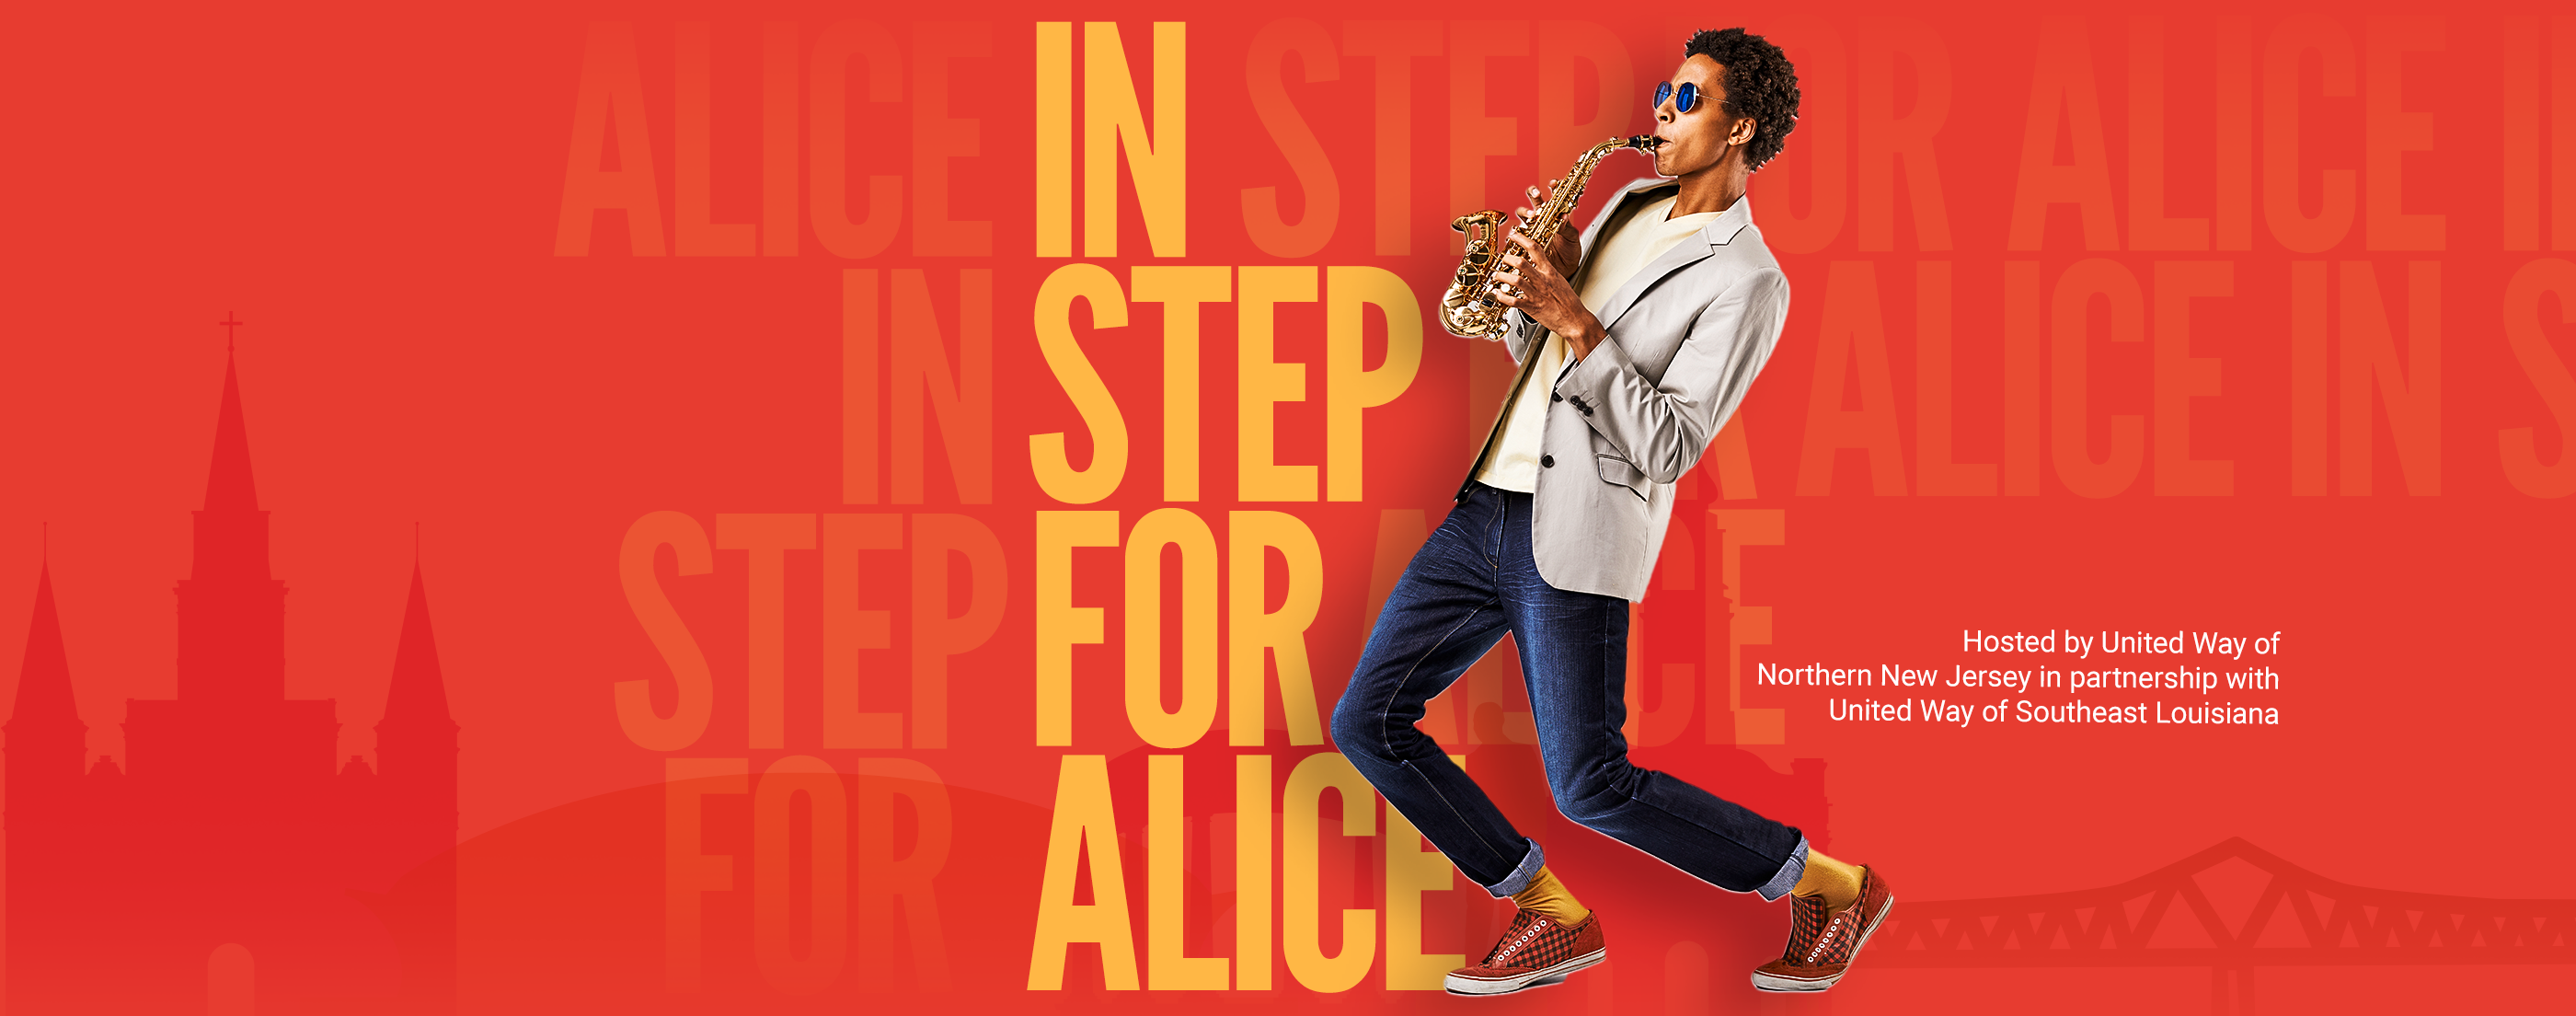 Jazz player in front of large gold text that reads IN STEP FOR ALICE, on a red background with notable New Orleans structures silhouetted in the background.